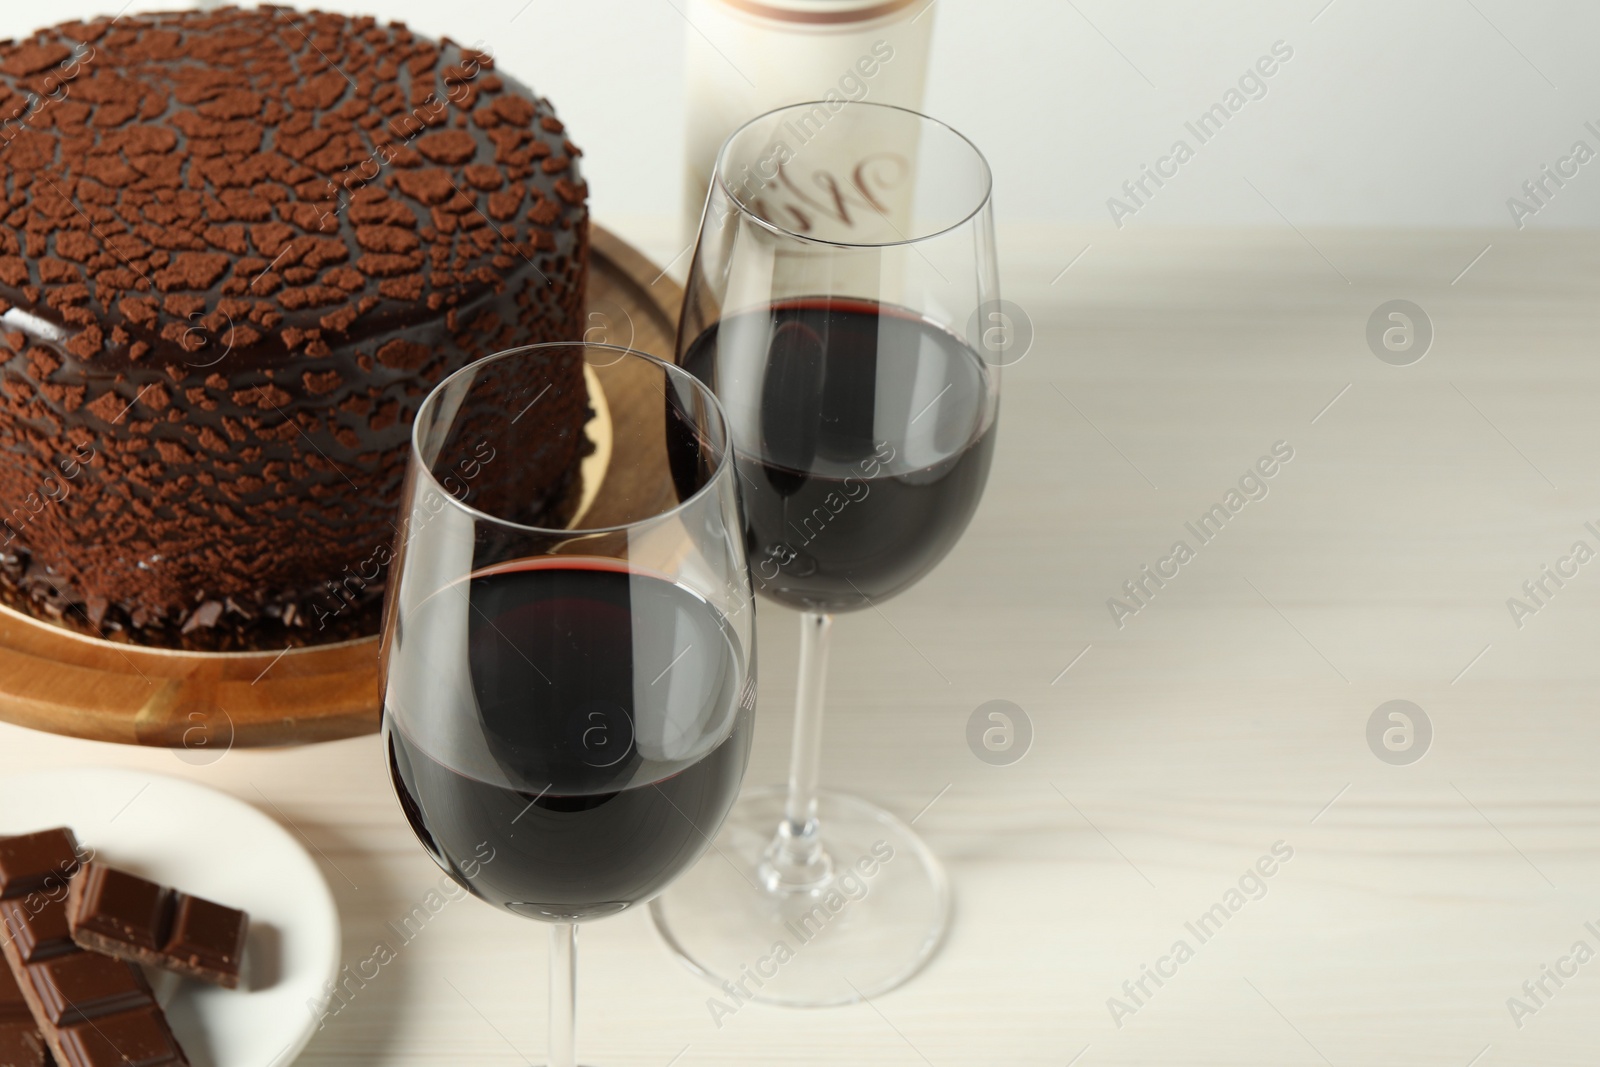 Photo of Delicious truffle cake, chocolate pieces and red wine on light wooden table, space for text